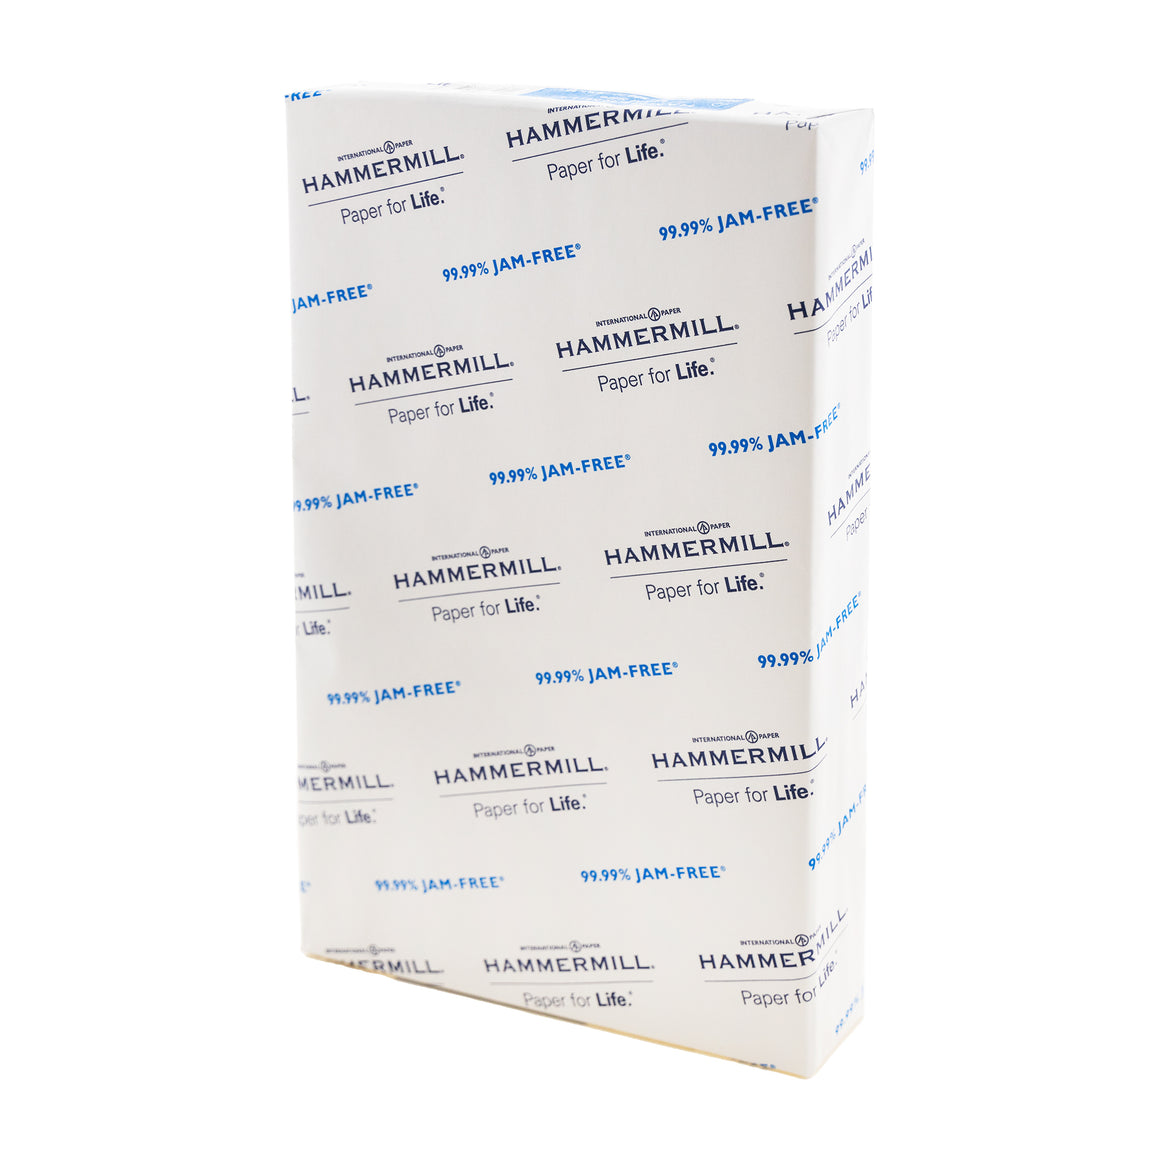 HAMMERMILL (92) 8.5" X 14" Legal Size Copy Paper (500 Sheets/Ream)